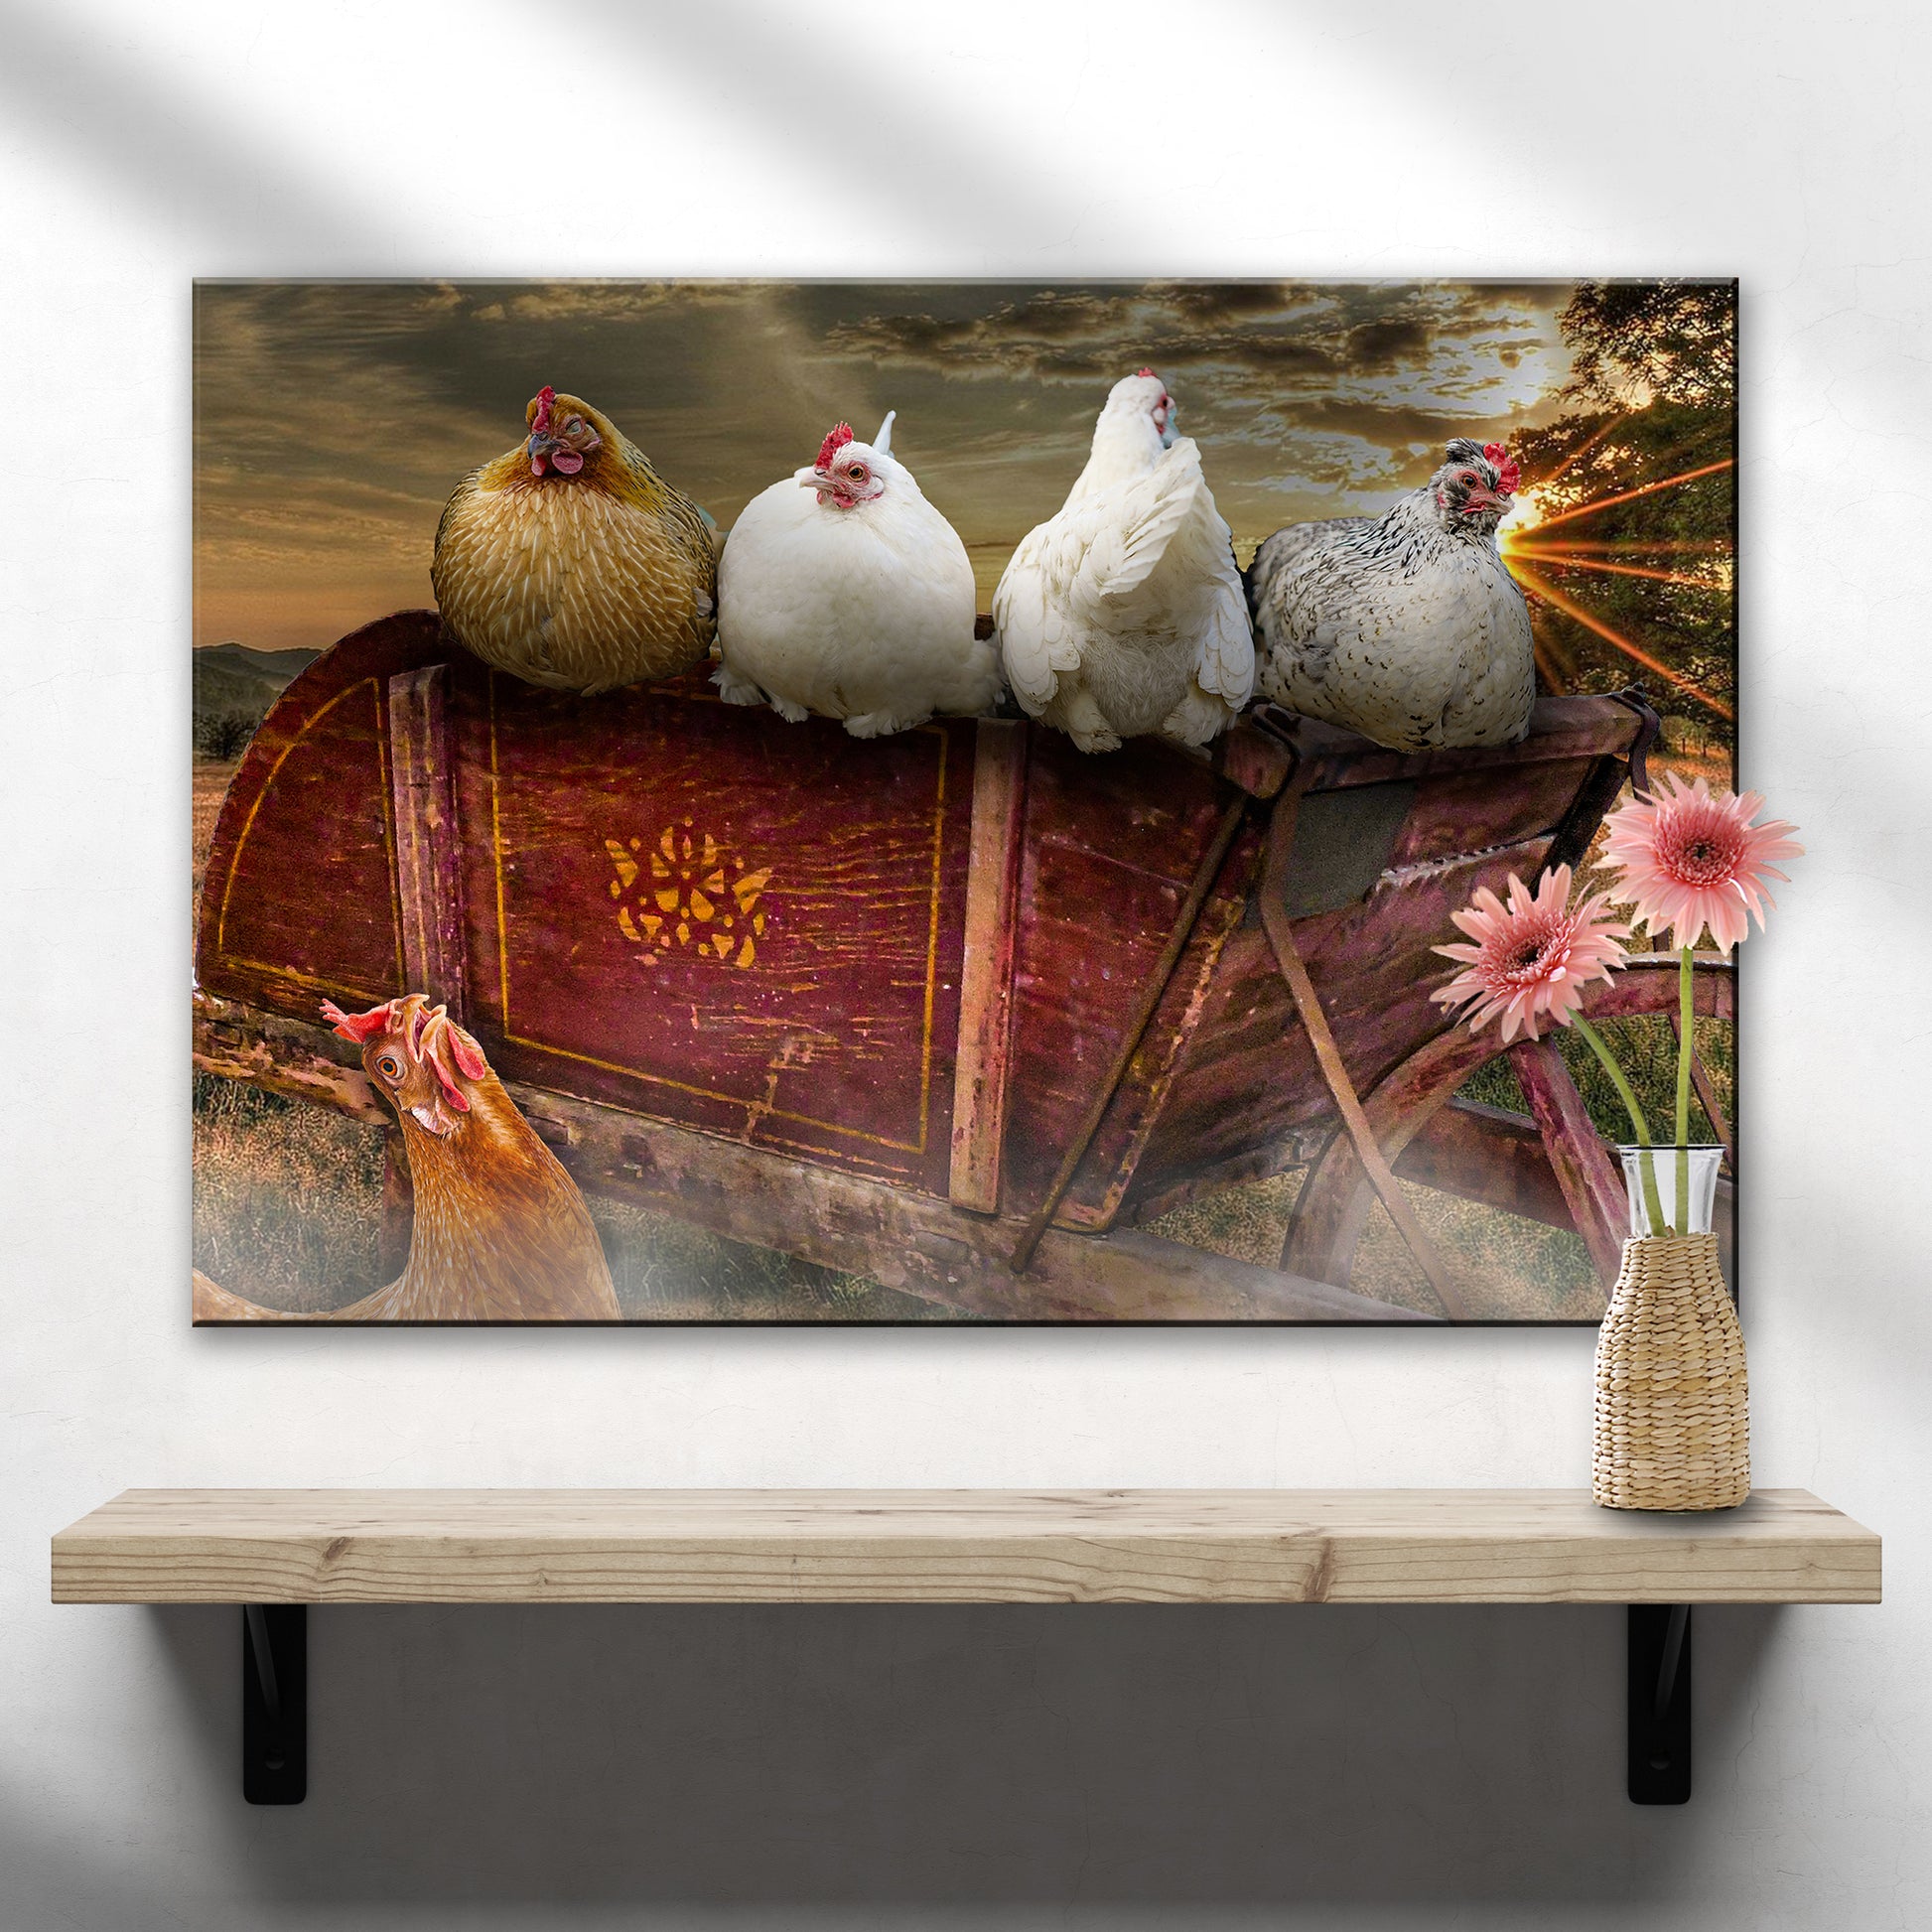 Modern Chickens On Wheelbarrow Canvas Wall Art - Image by Tailored Canvases